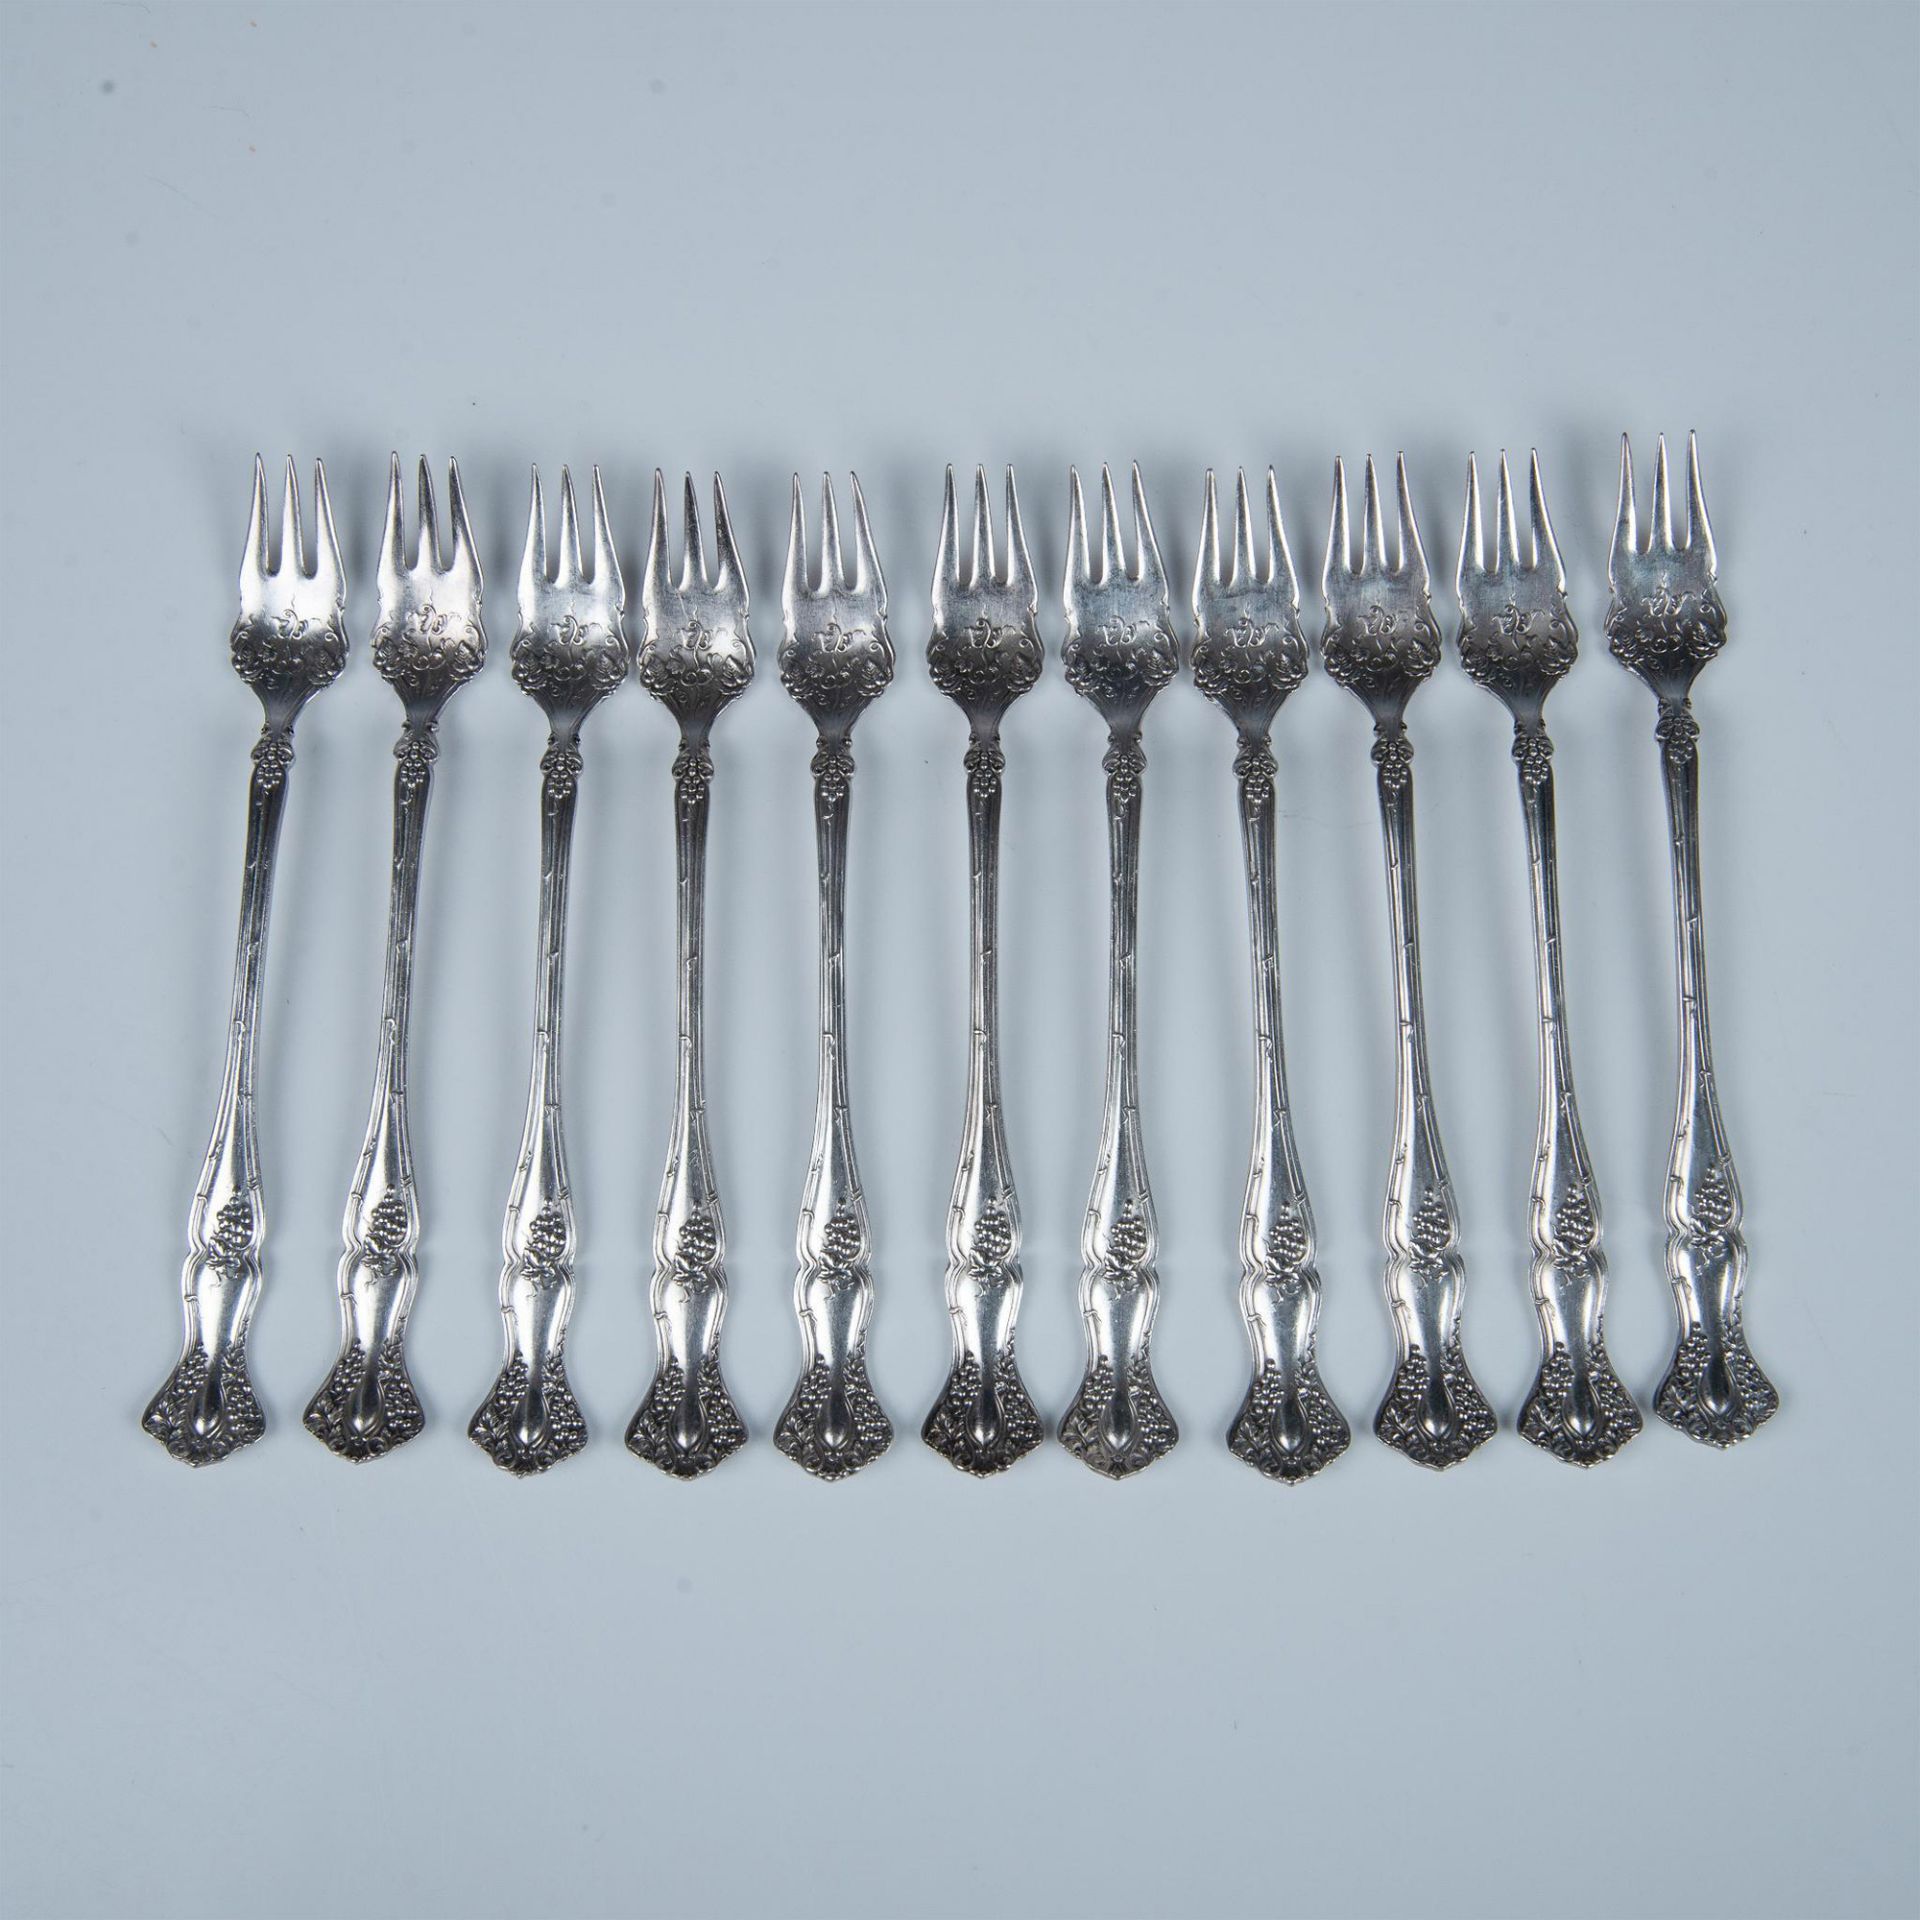 11pc Rogers Bros. 1847 Silverplate Oyster Forks, Vintage